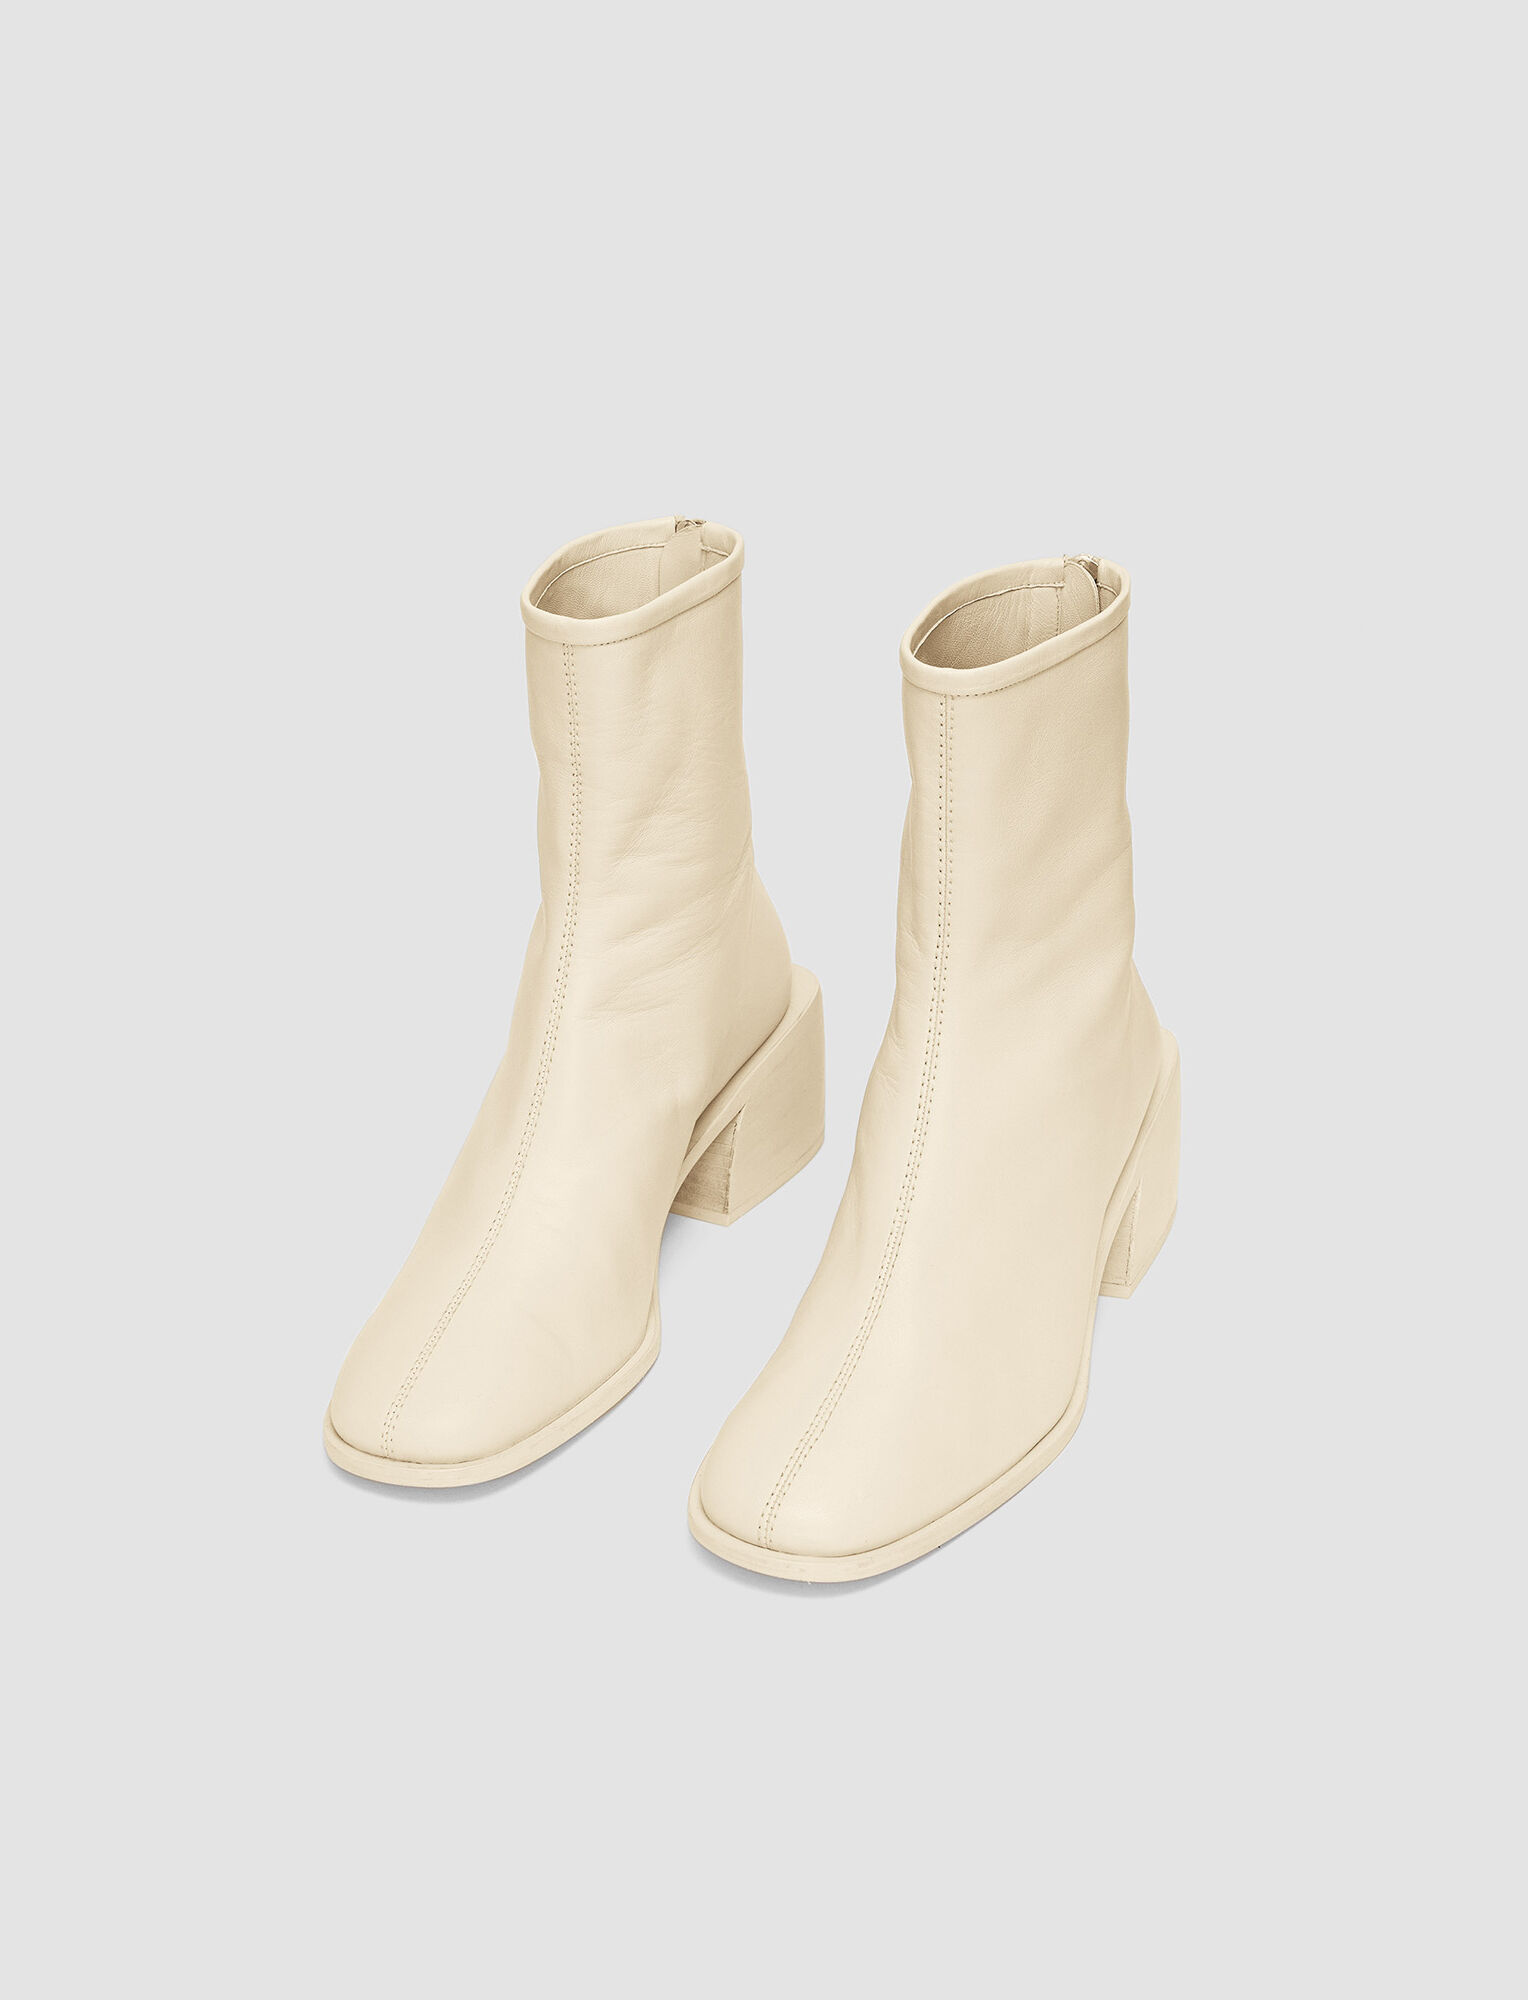 Joseph, Leather Ankle Boot, in Oyster White